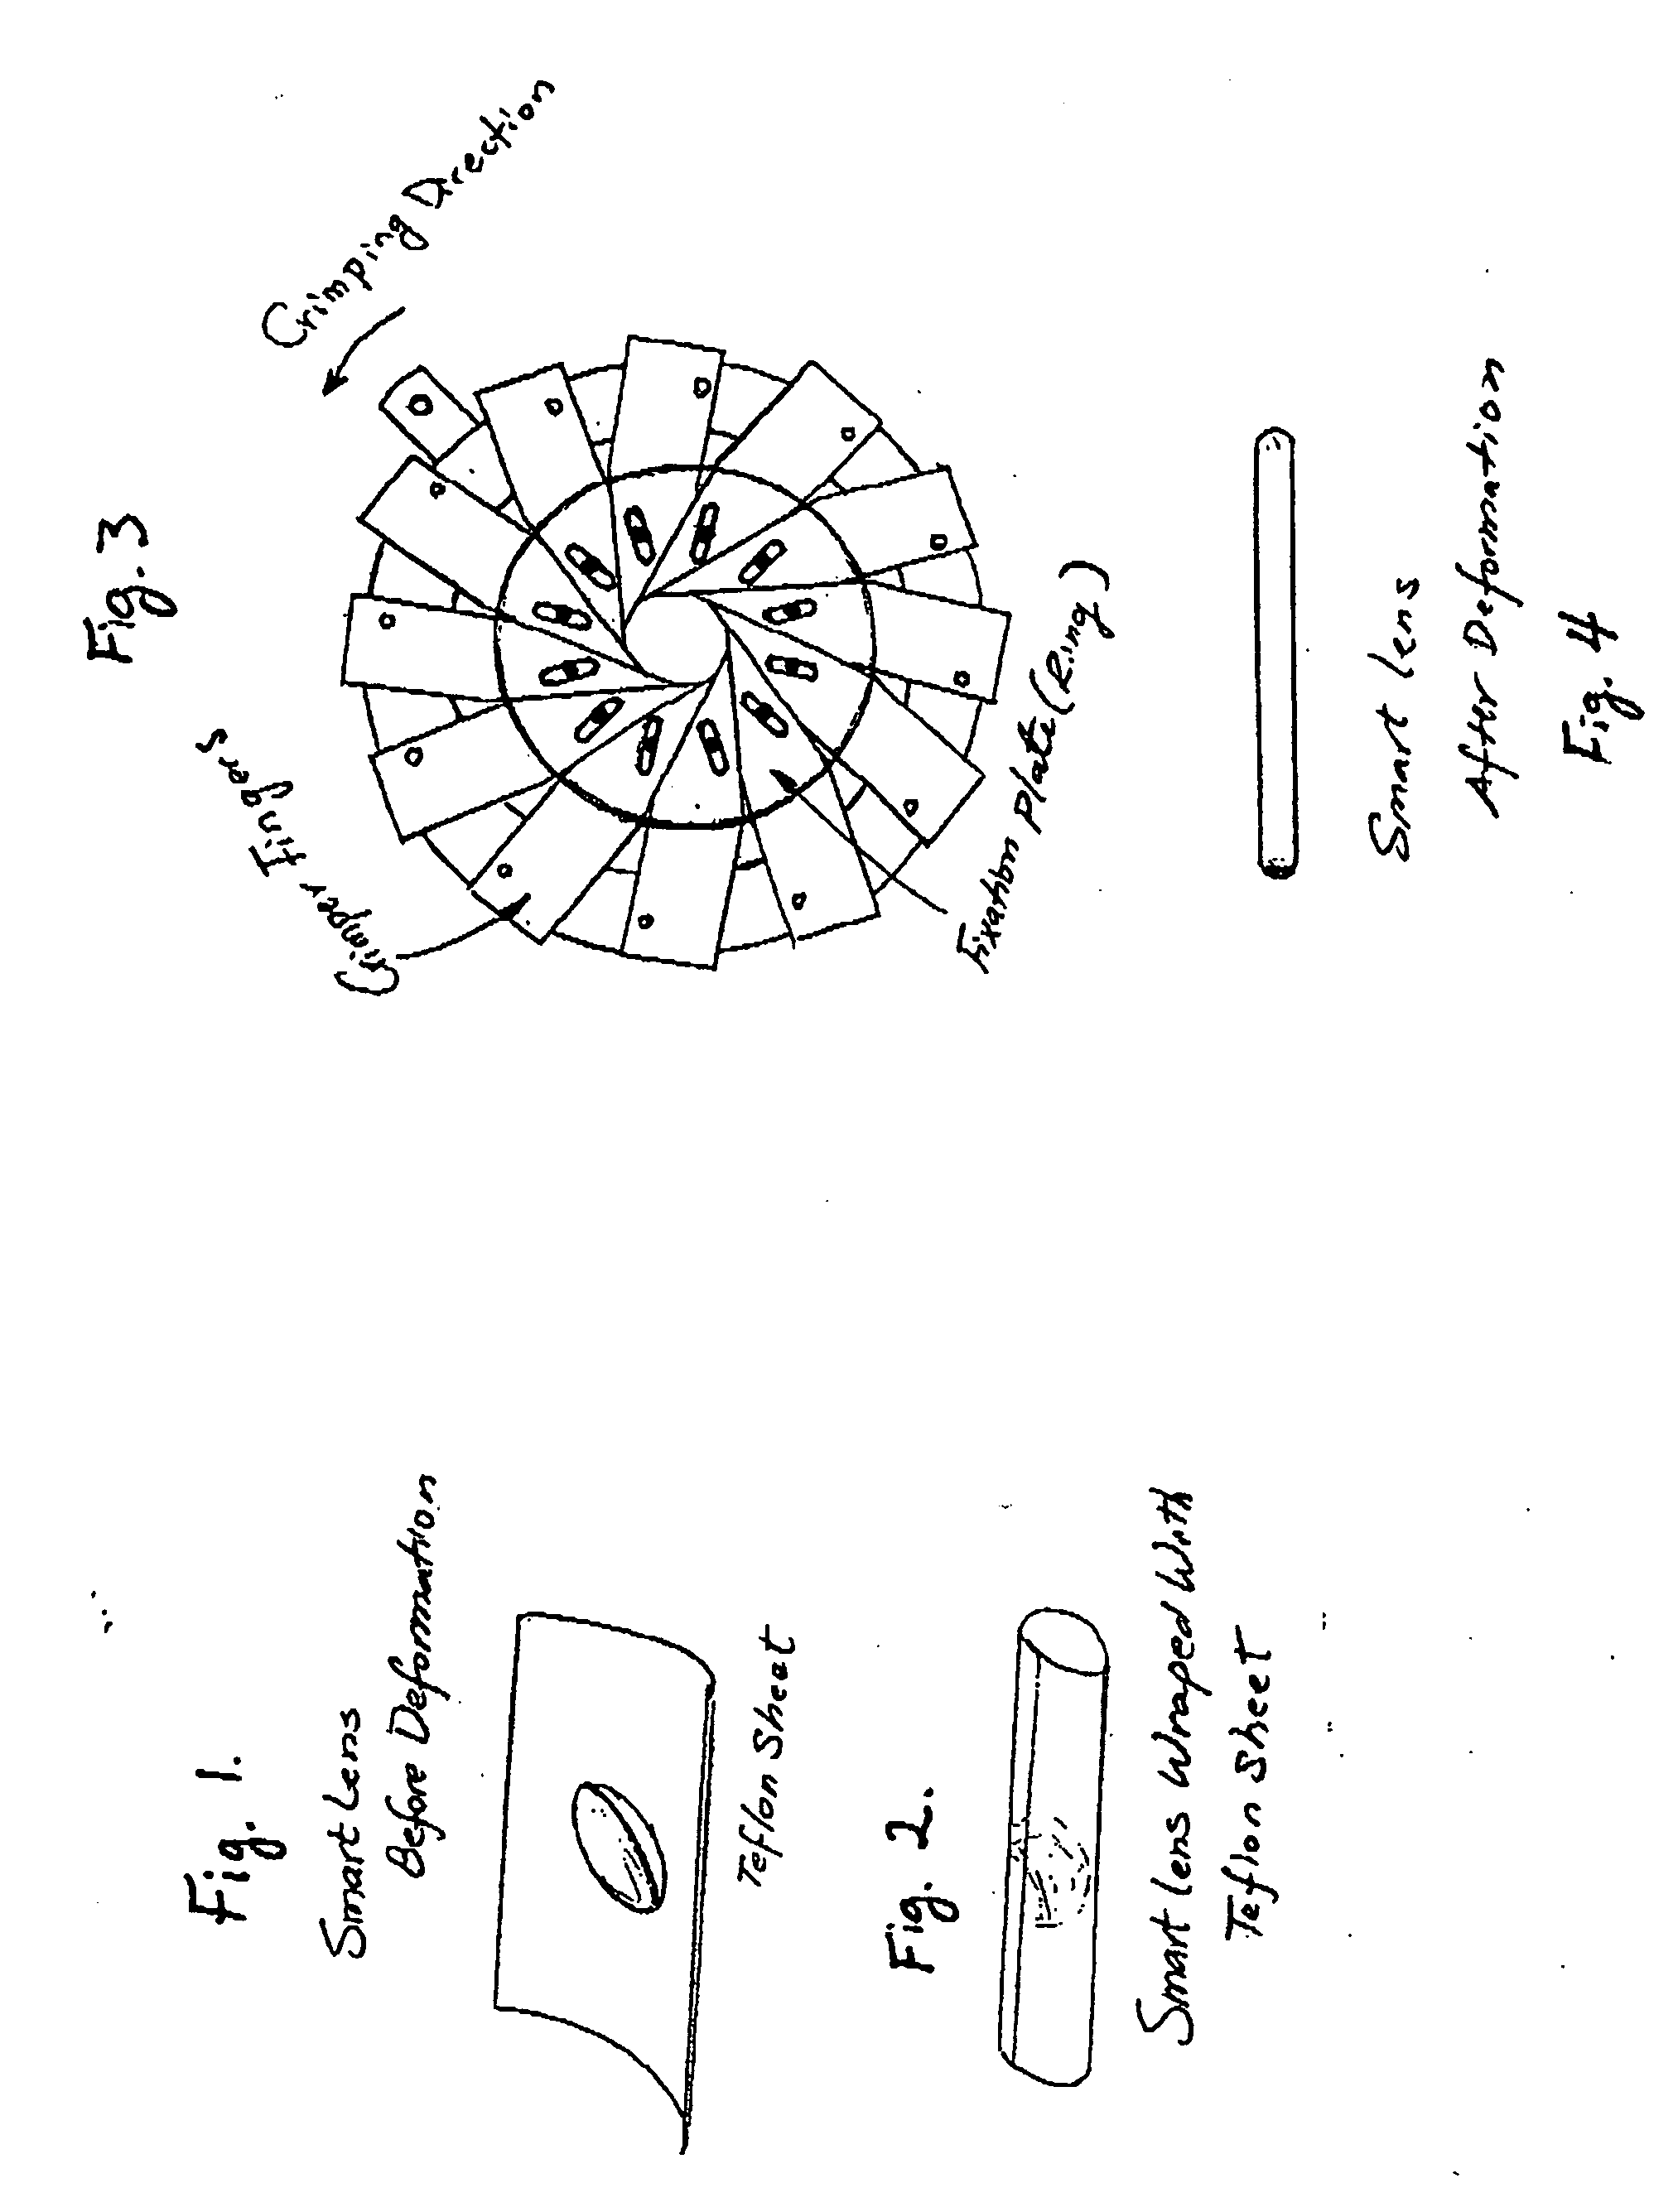 Apparatus and method for implanting intraocular lens through a small incision